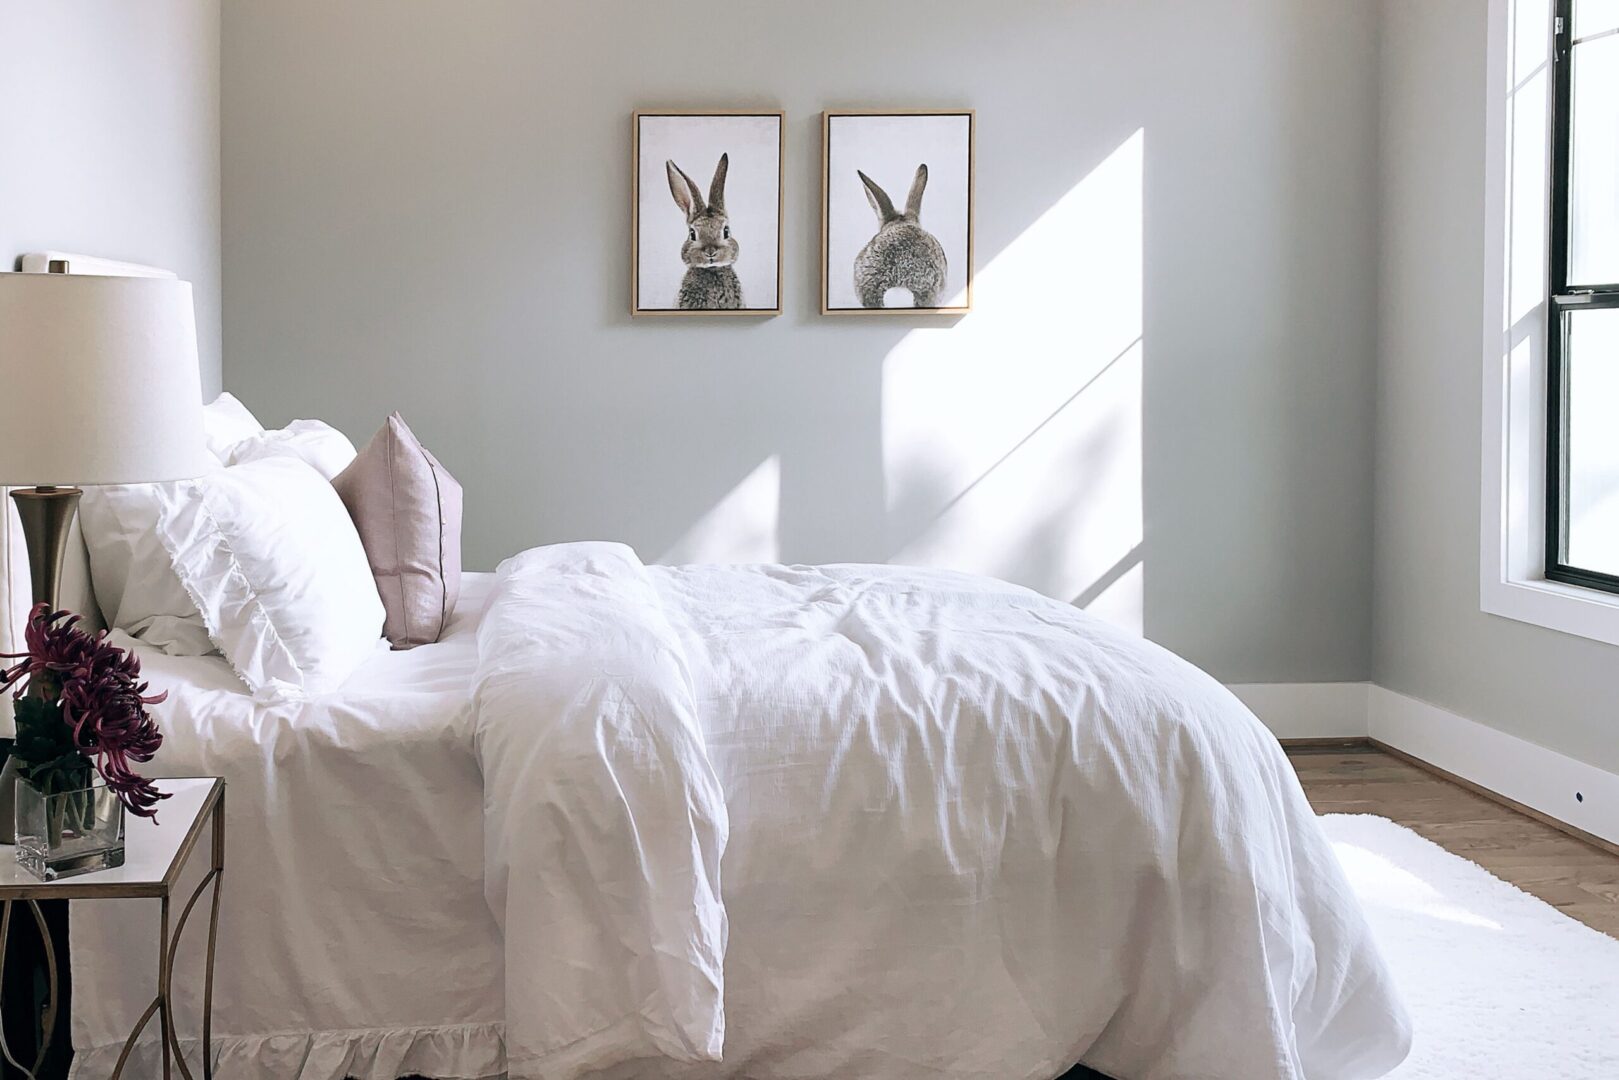 A white bed in a bedroom with two framed pictures.